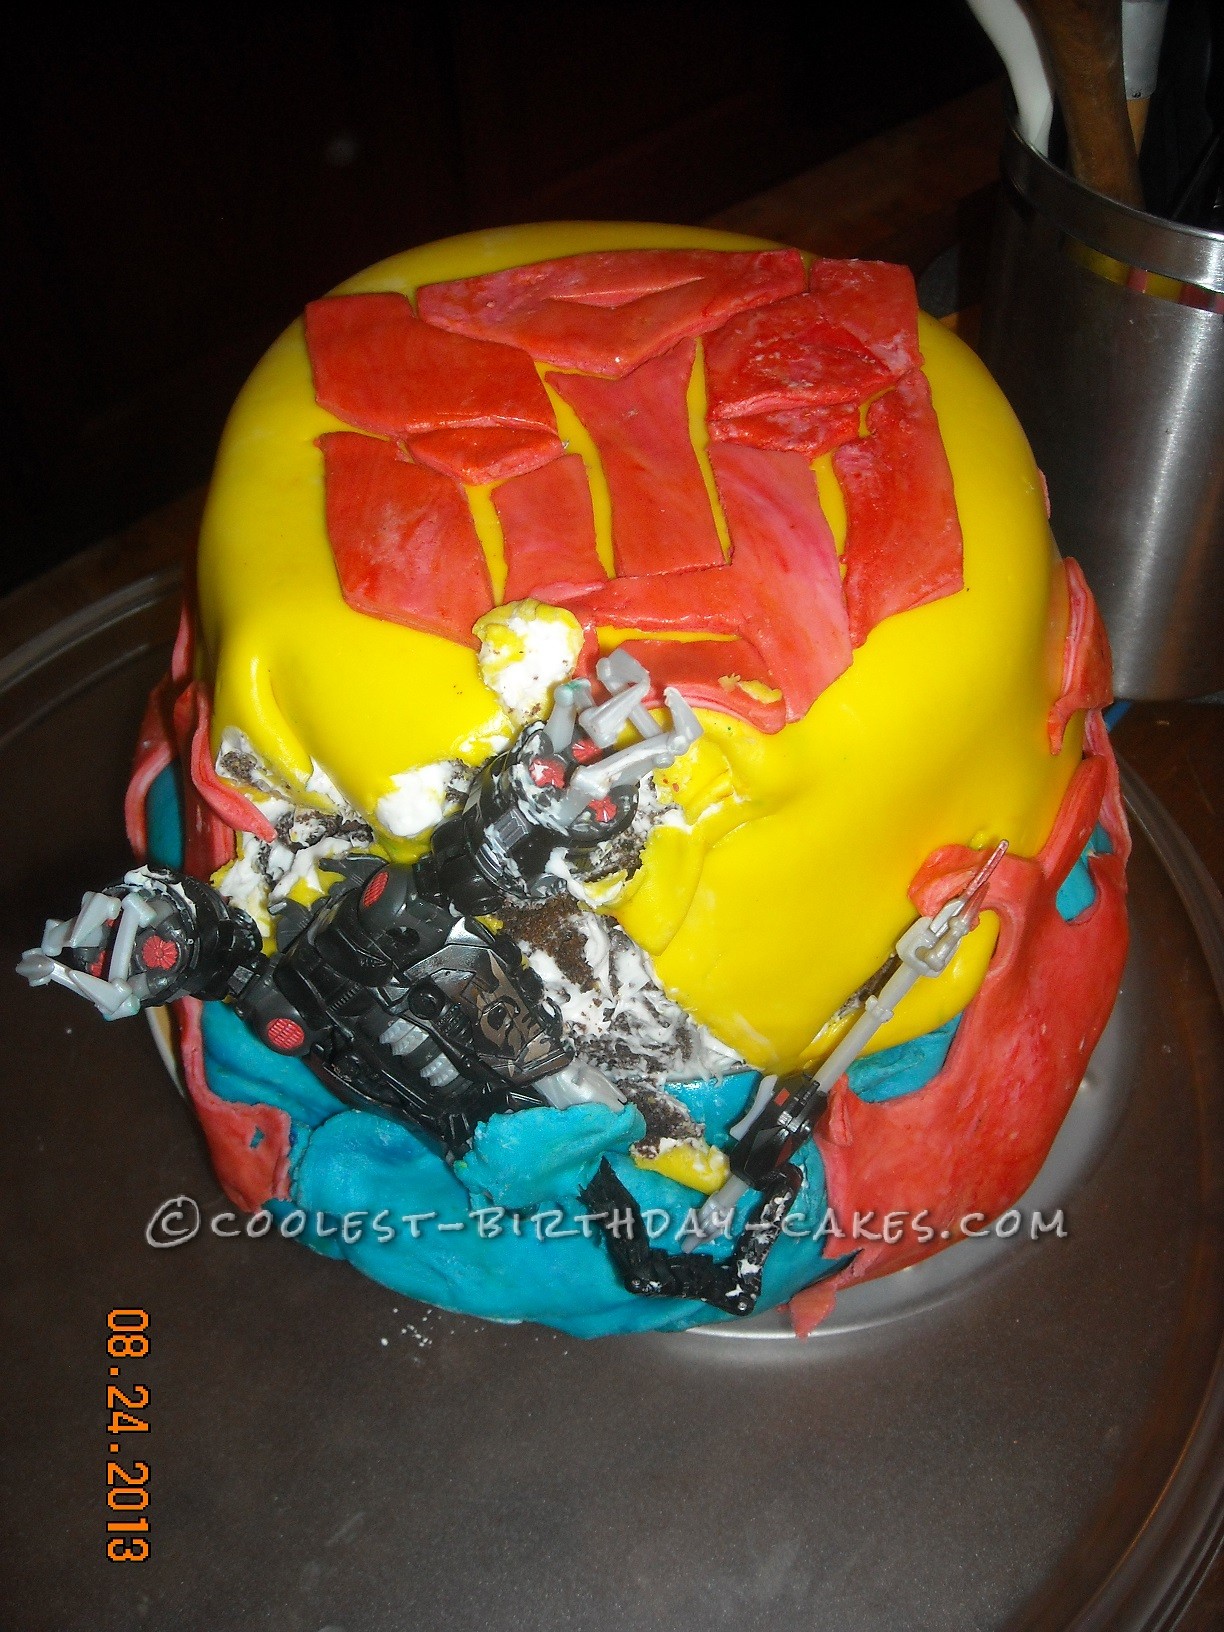 Coolest Transformers Cake - Destroyed by Scorponok